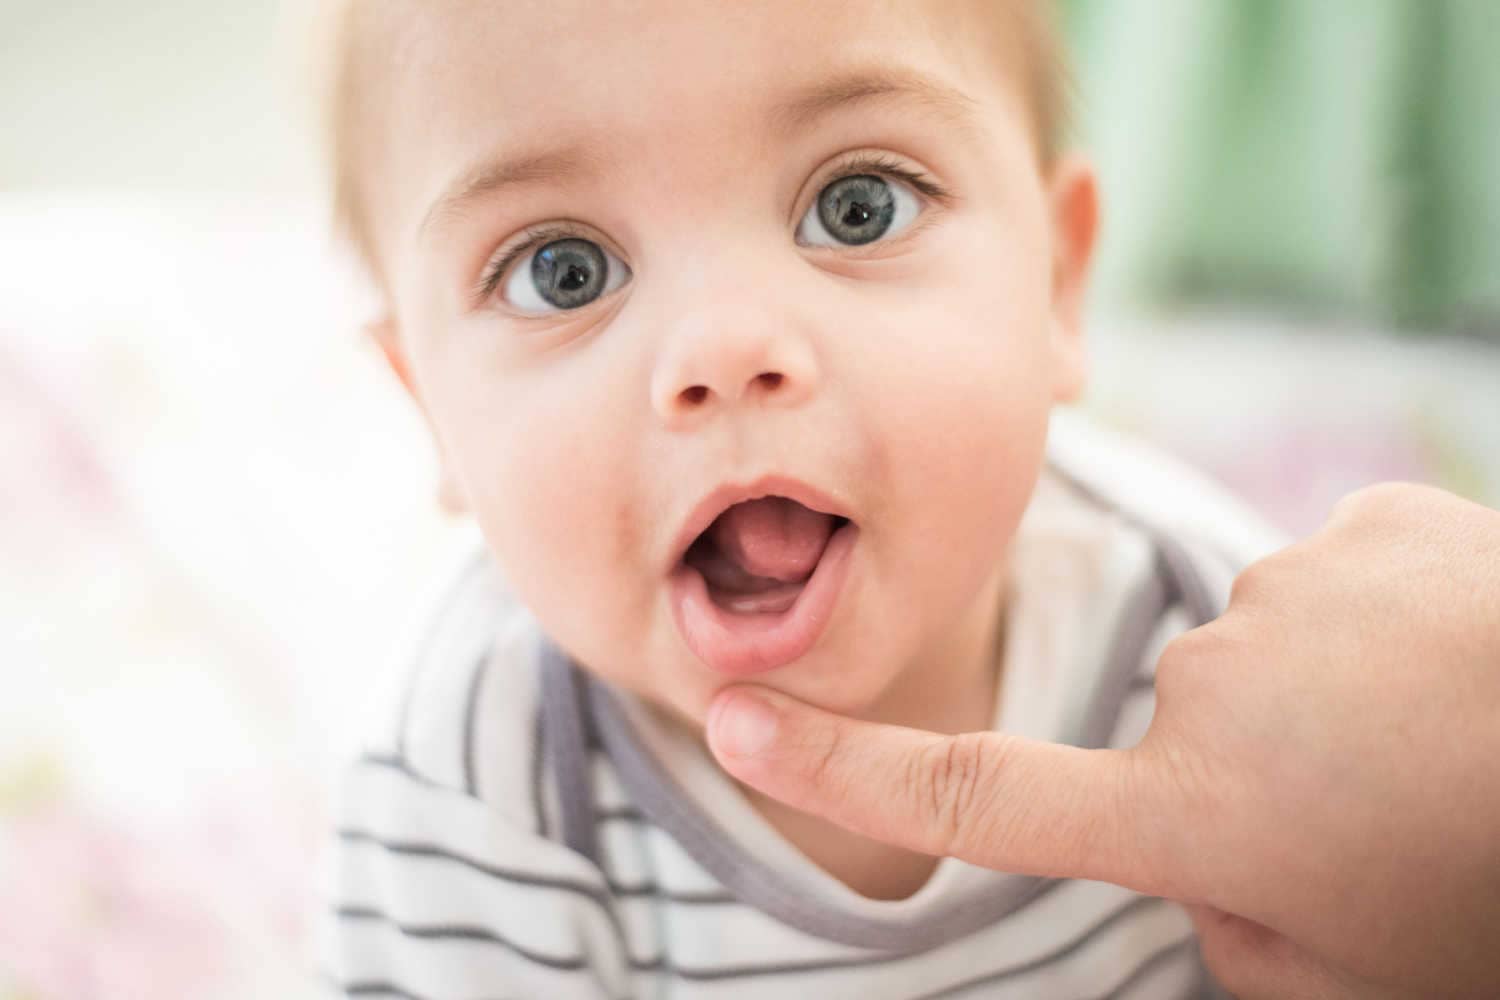 Precautions for sore gums in babies